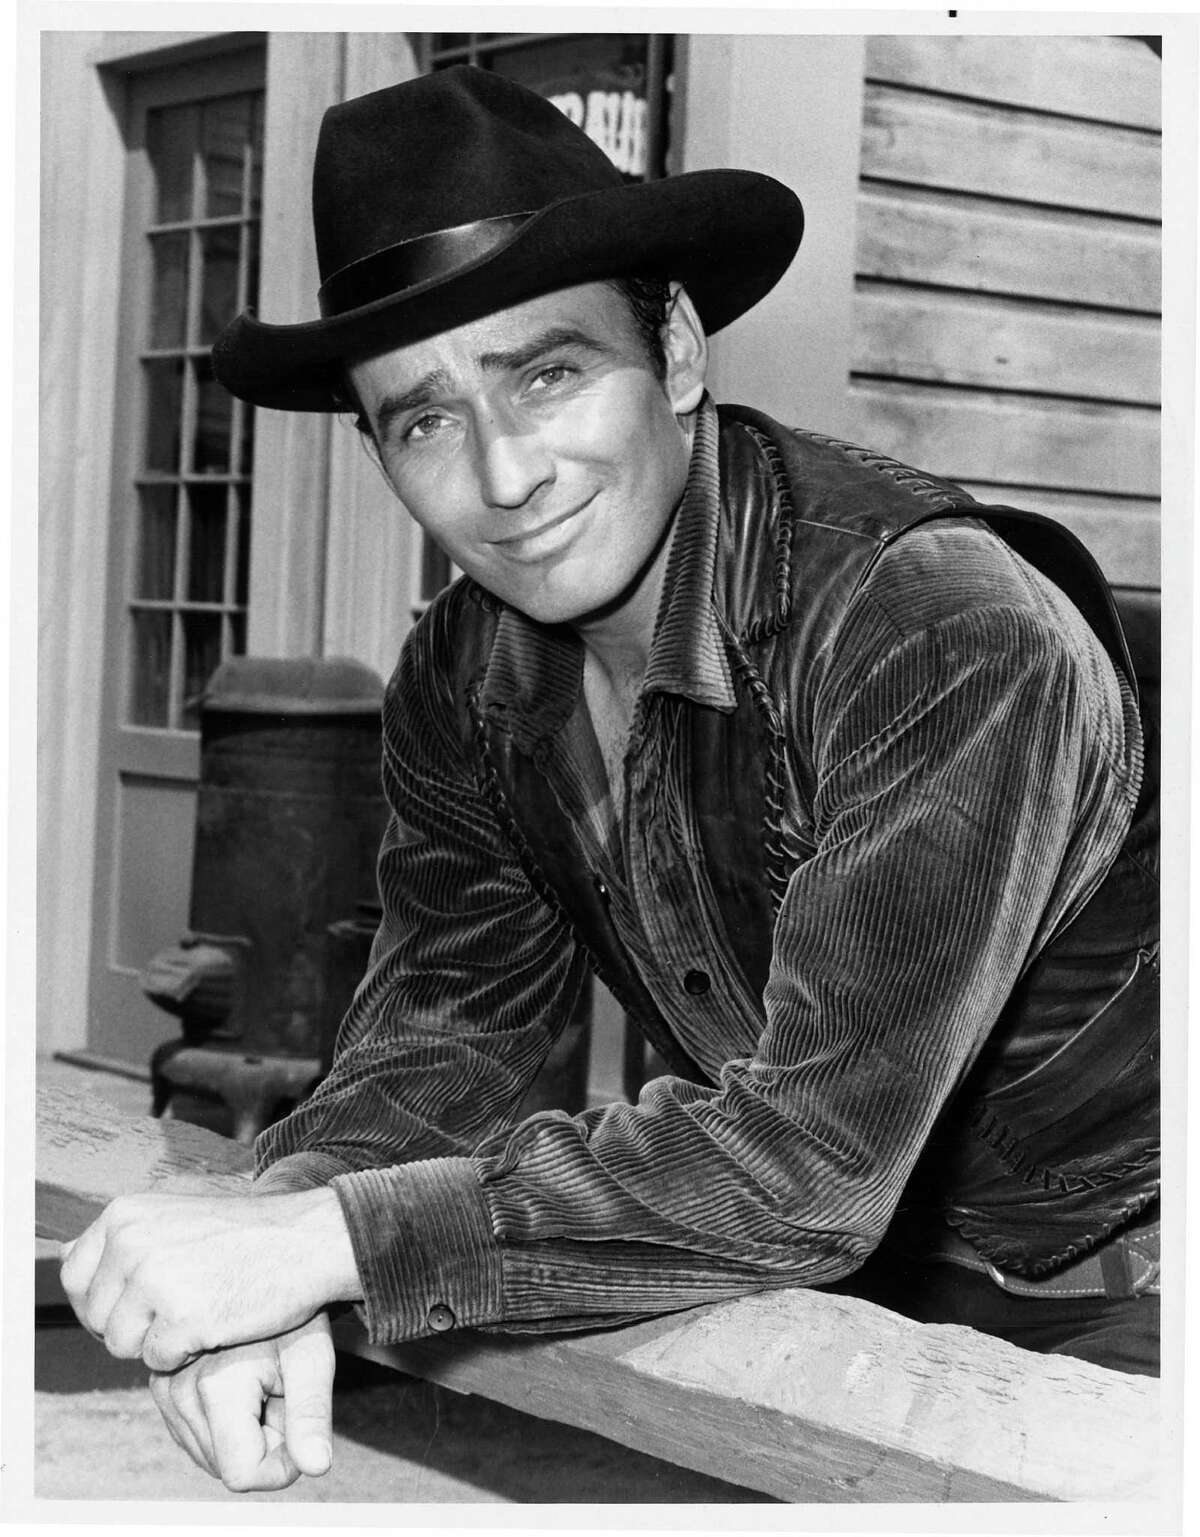 James Drury gained fame as the star of "The Virginian," a groundbreaking 90-minute Western that ran on NBC from 1962 to 1971 and still has fans thanks to DVDs and cable TV reruns.